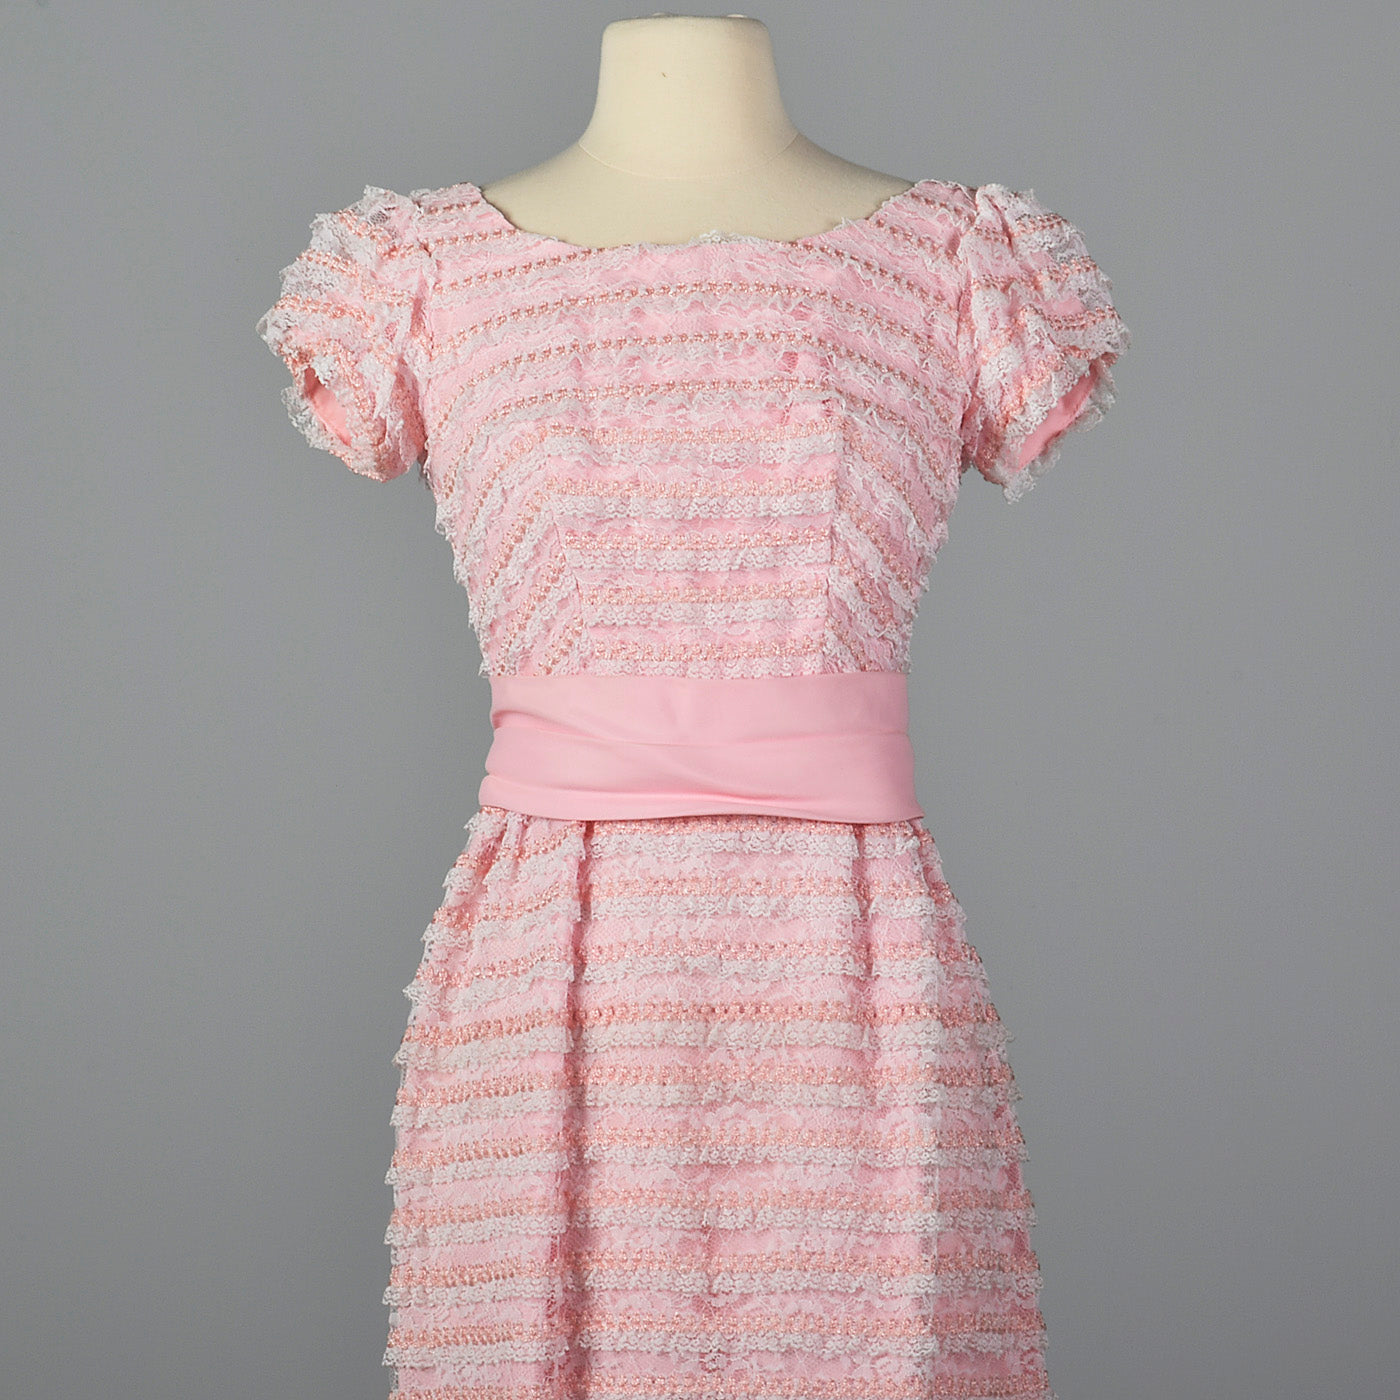 1960s Pink and White Lace Pencil Dress